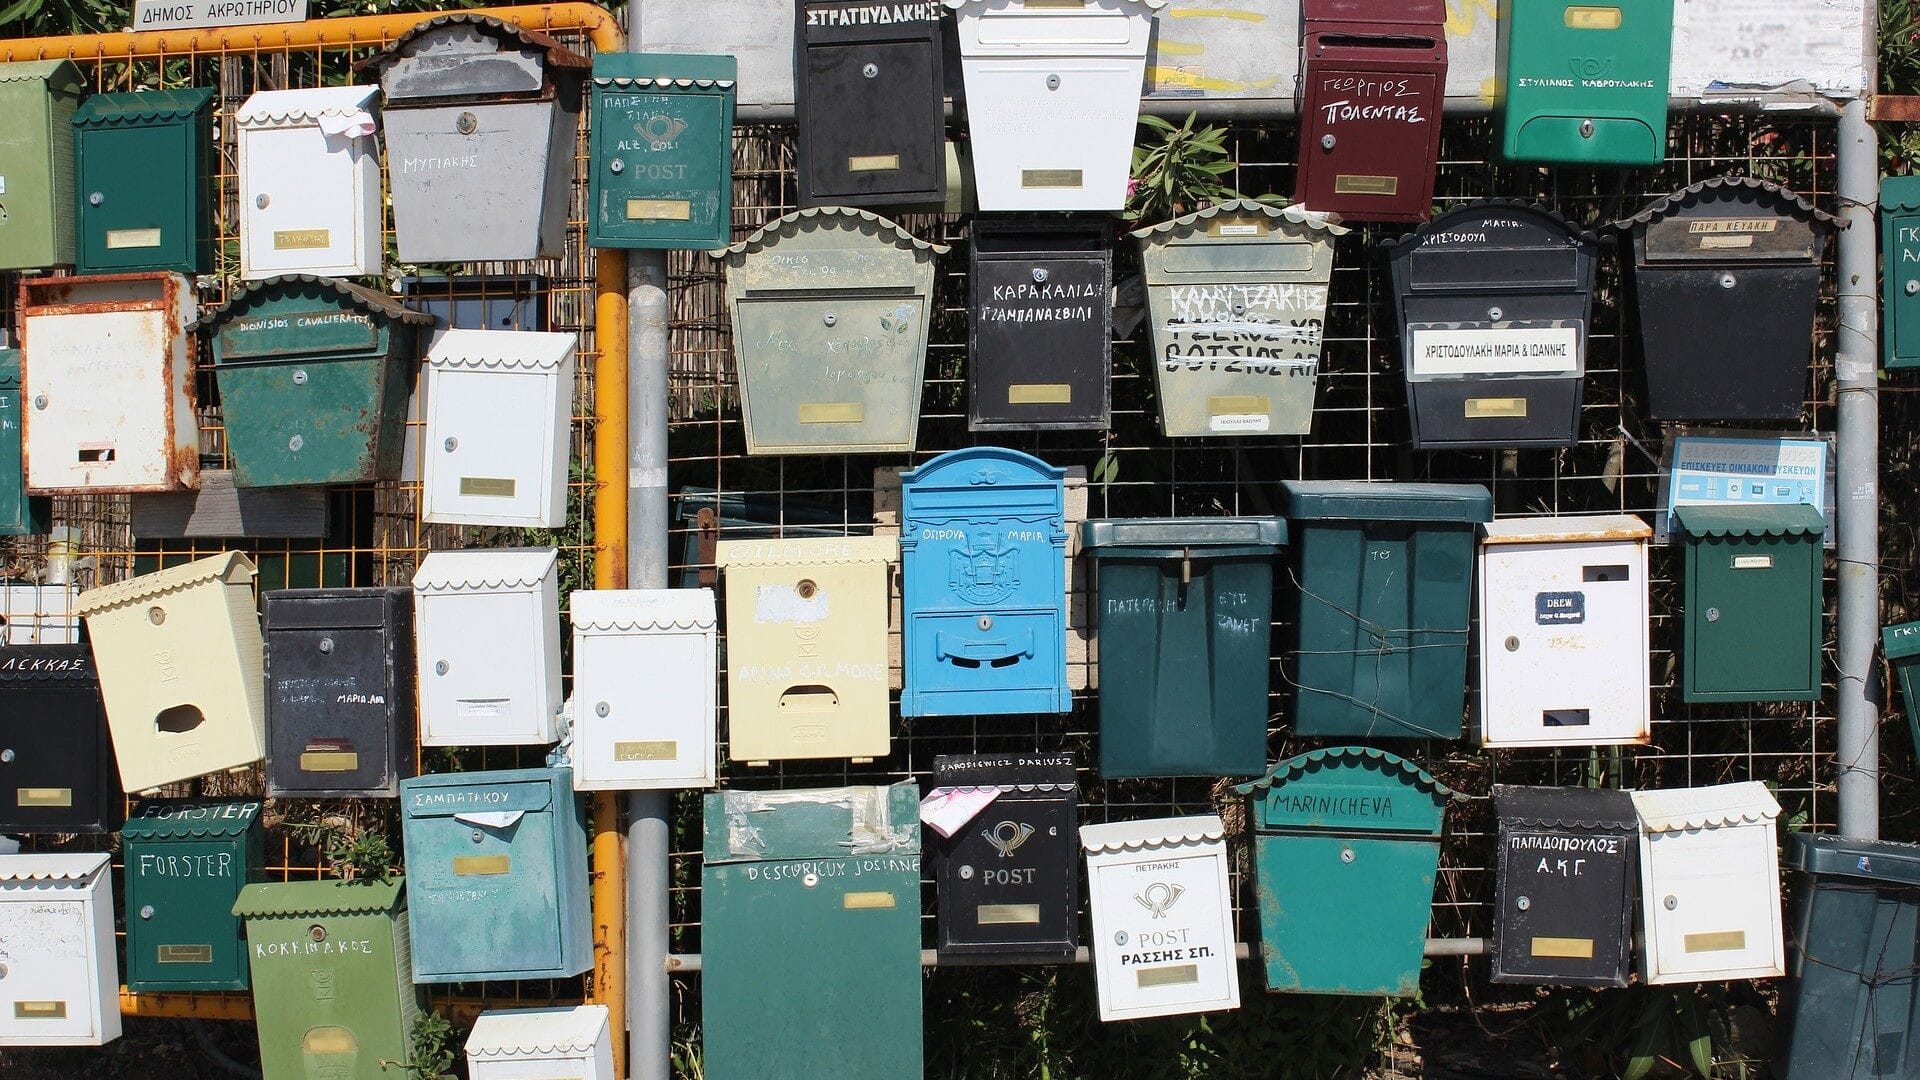 Image: a collection of various mailboxes